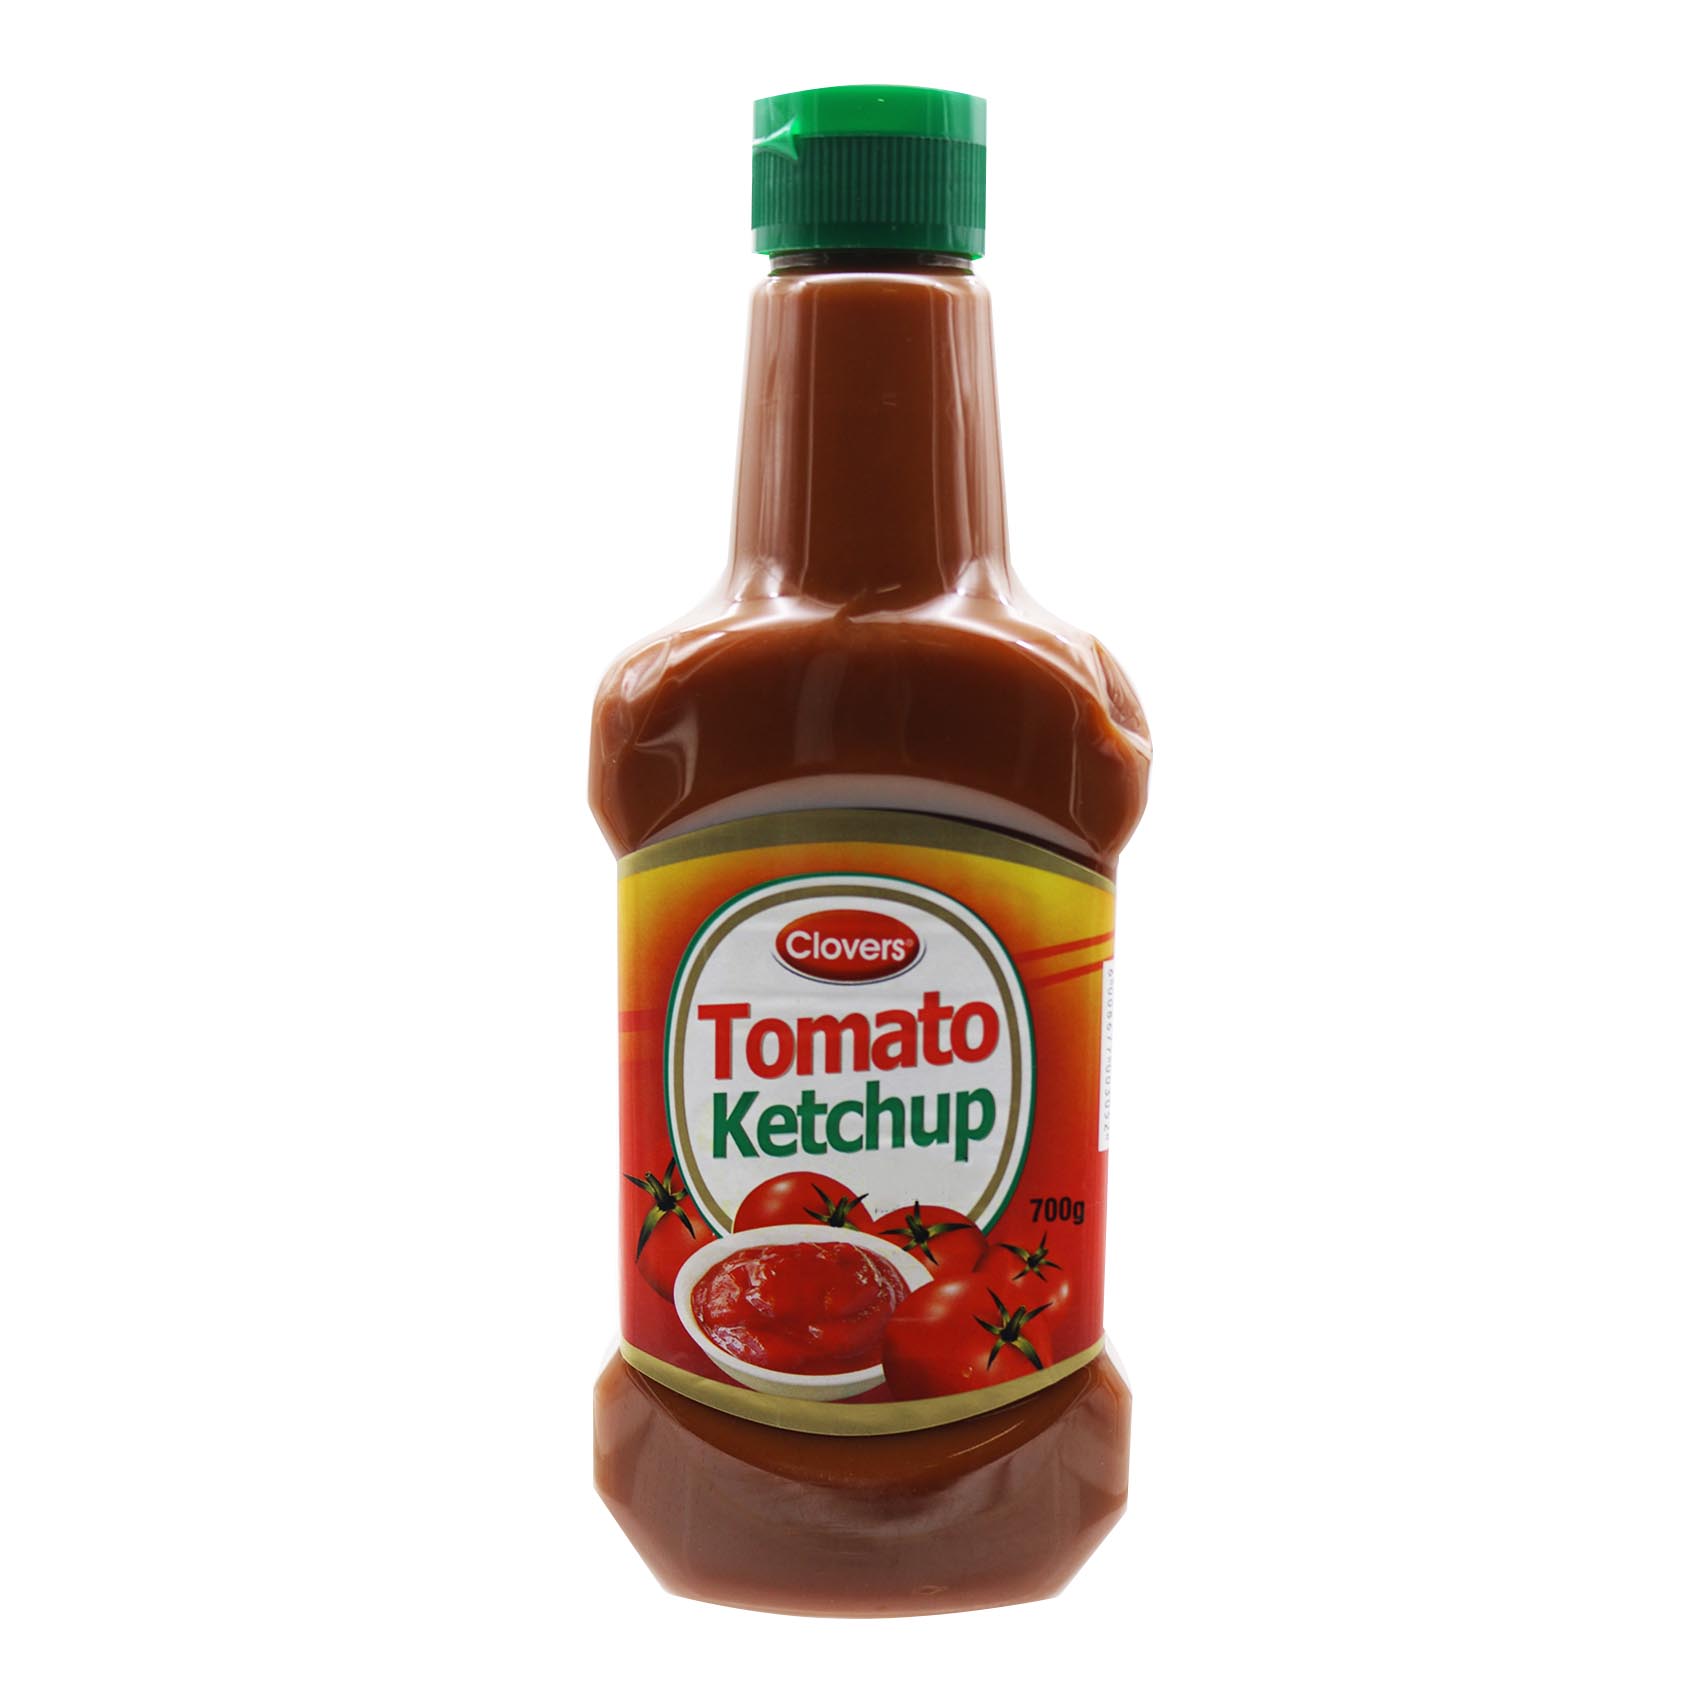 Clovers Tomato Ketchup 700G